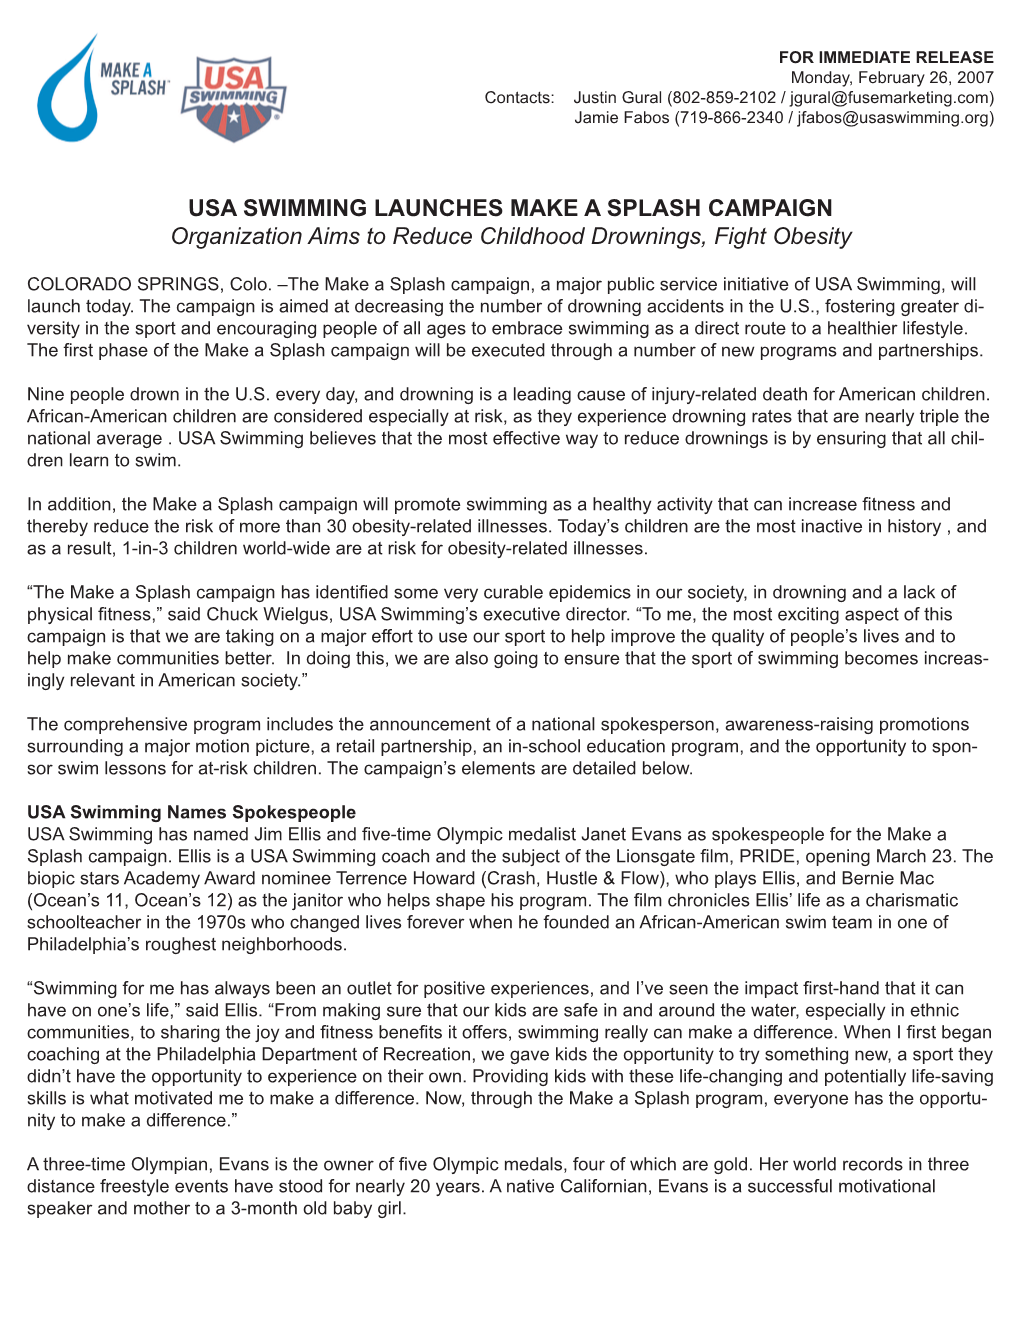 USA SWIMMING LAUNCHES MAKE a SPLASH CAMPAIGN Organization Aims to Reduce Childhood Drownings, Fight Obesity